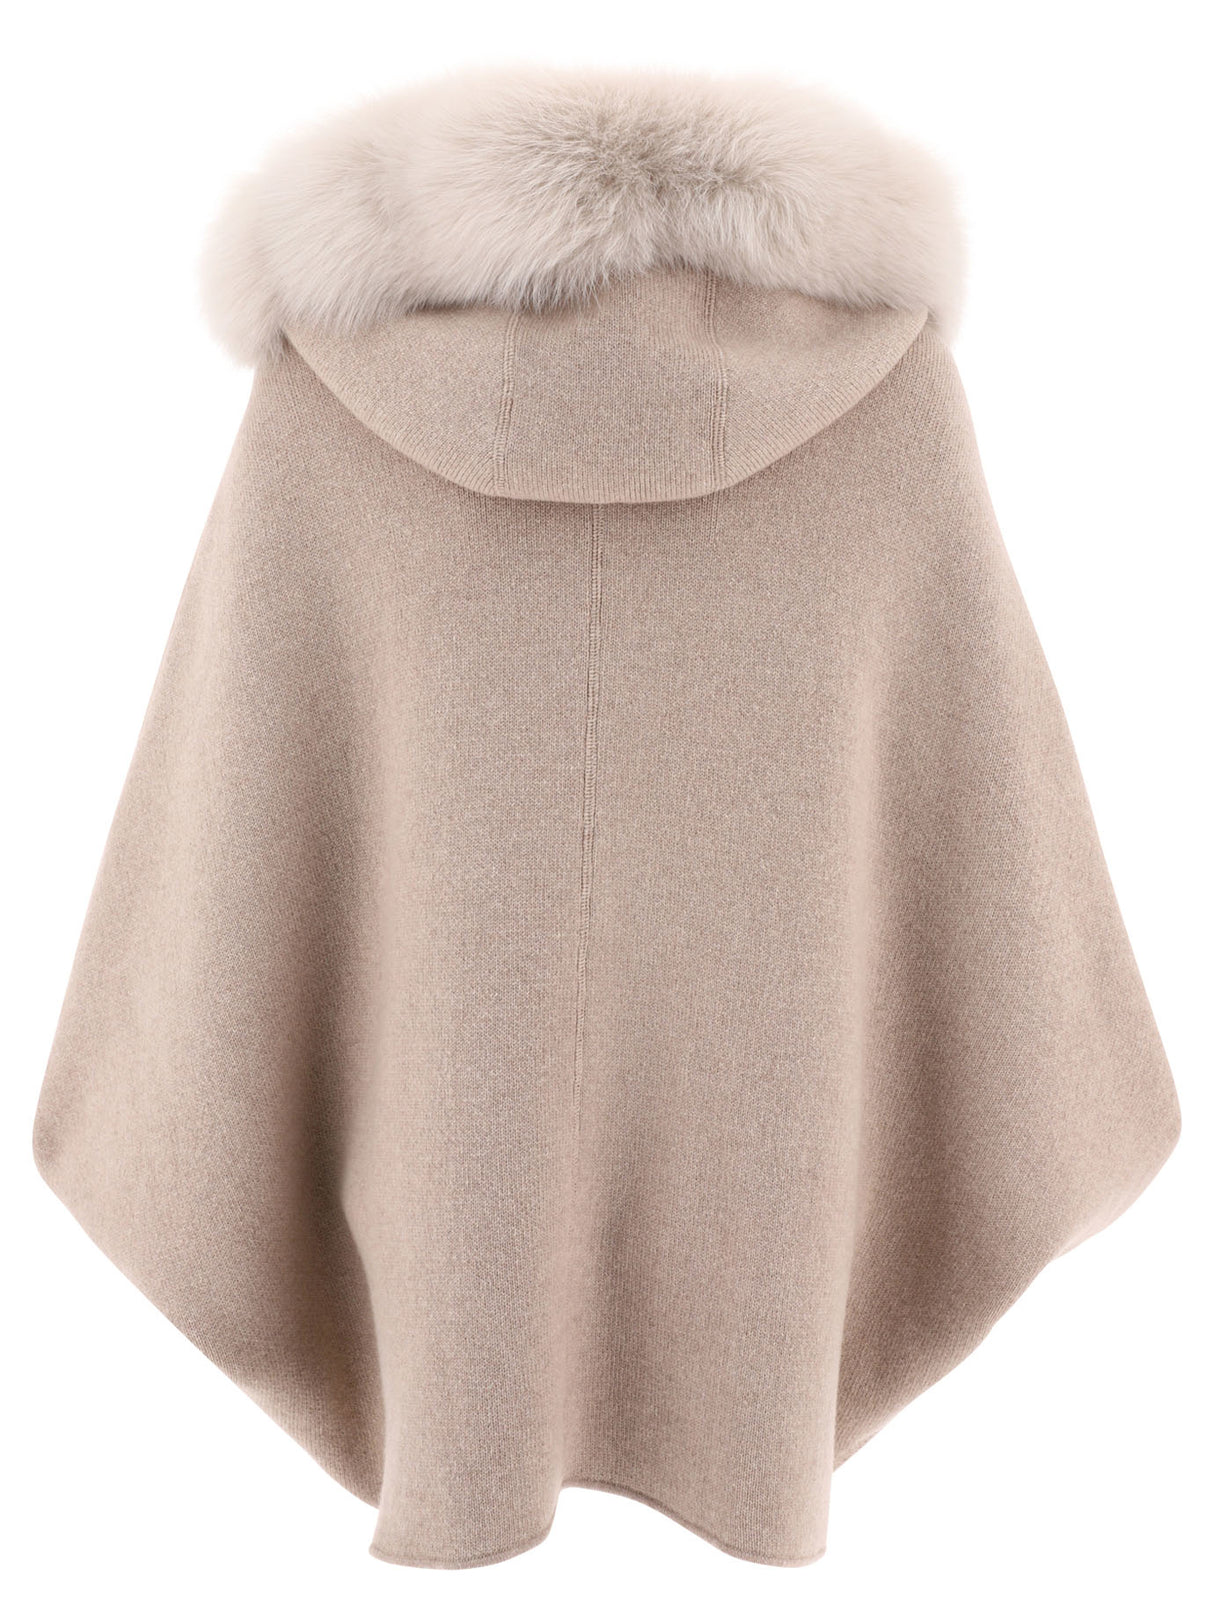 GIOVI Luxurious Beige Wool and Cashmere Cape for Women - FW23 Collection